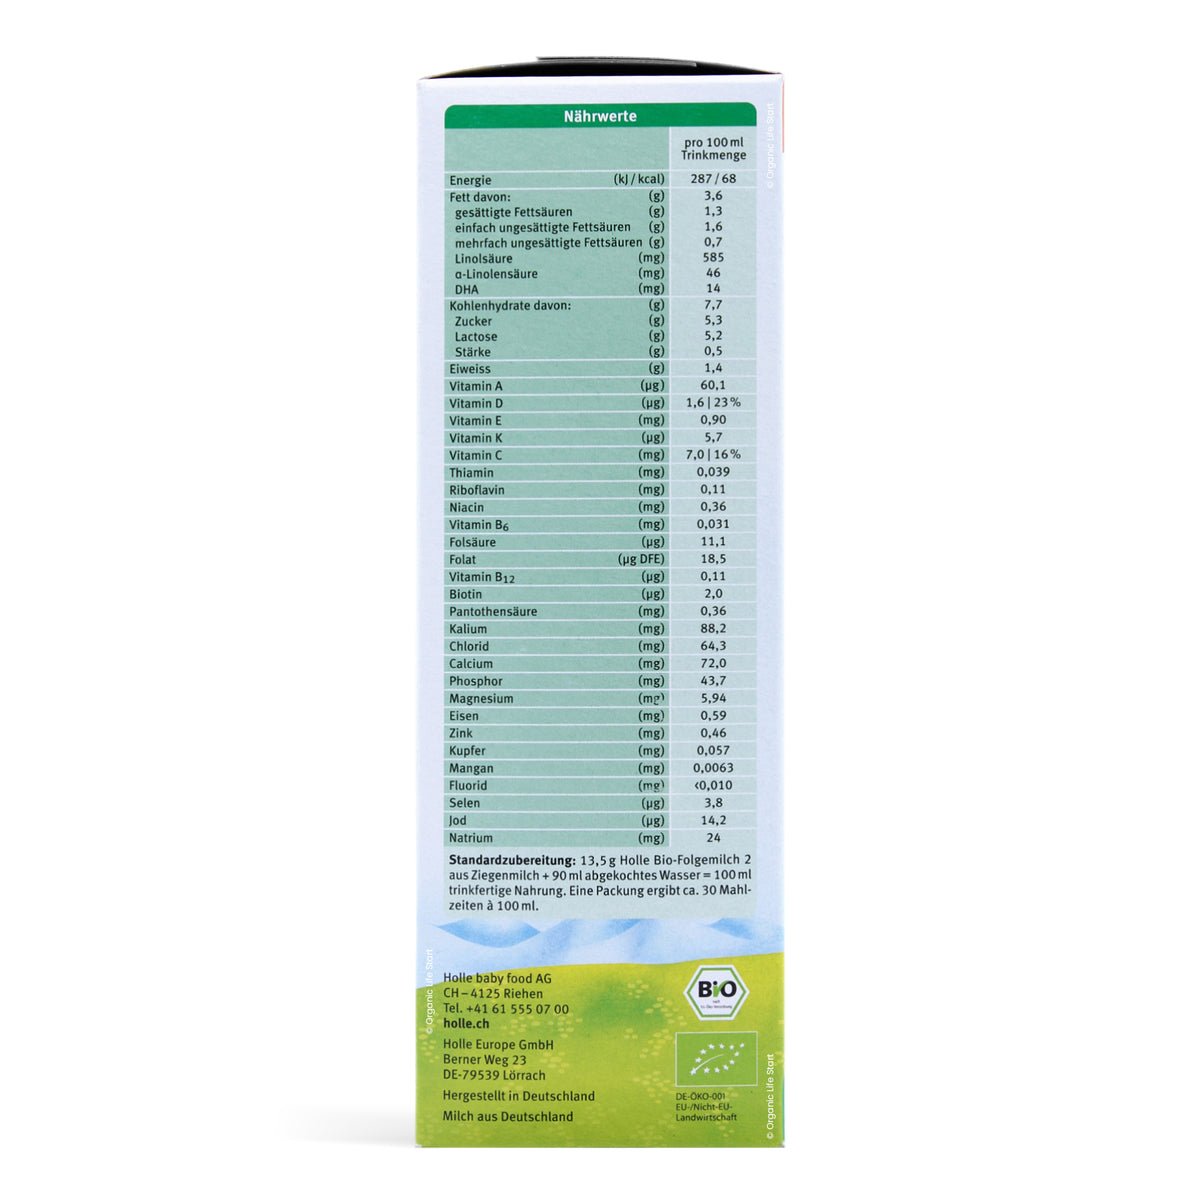 Holle Goat Stage 2 Ingredients Nutritional Information